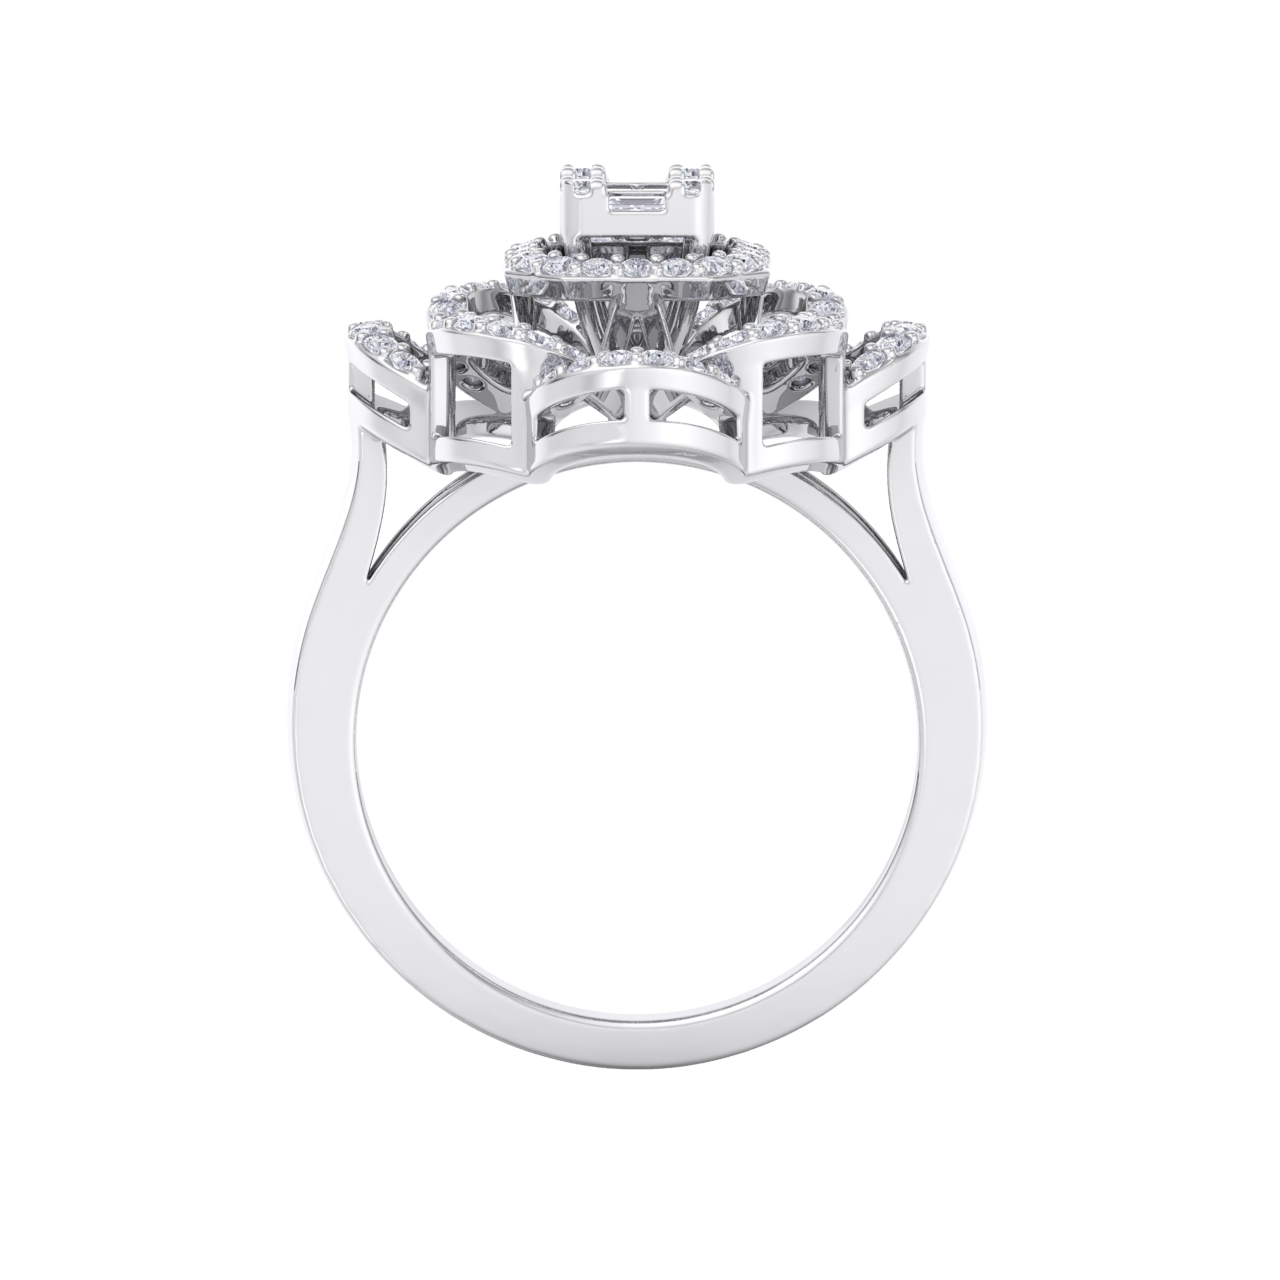 Diamond ring in white gold with white diamonds of 0.53 ct in weight